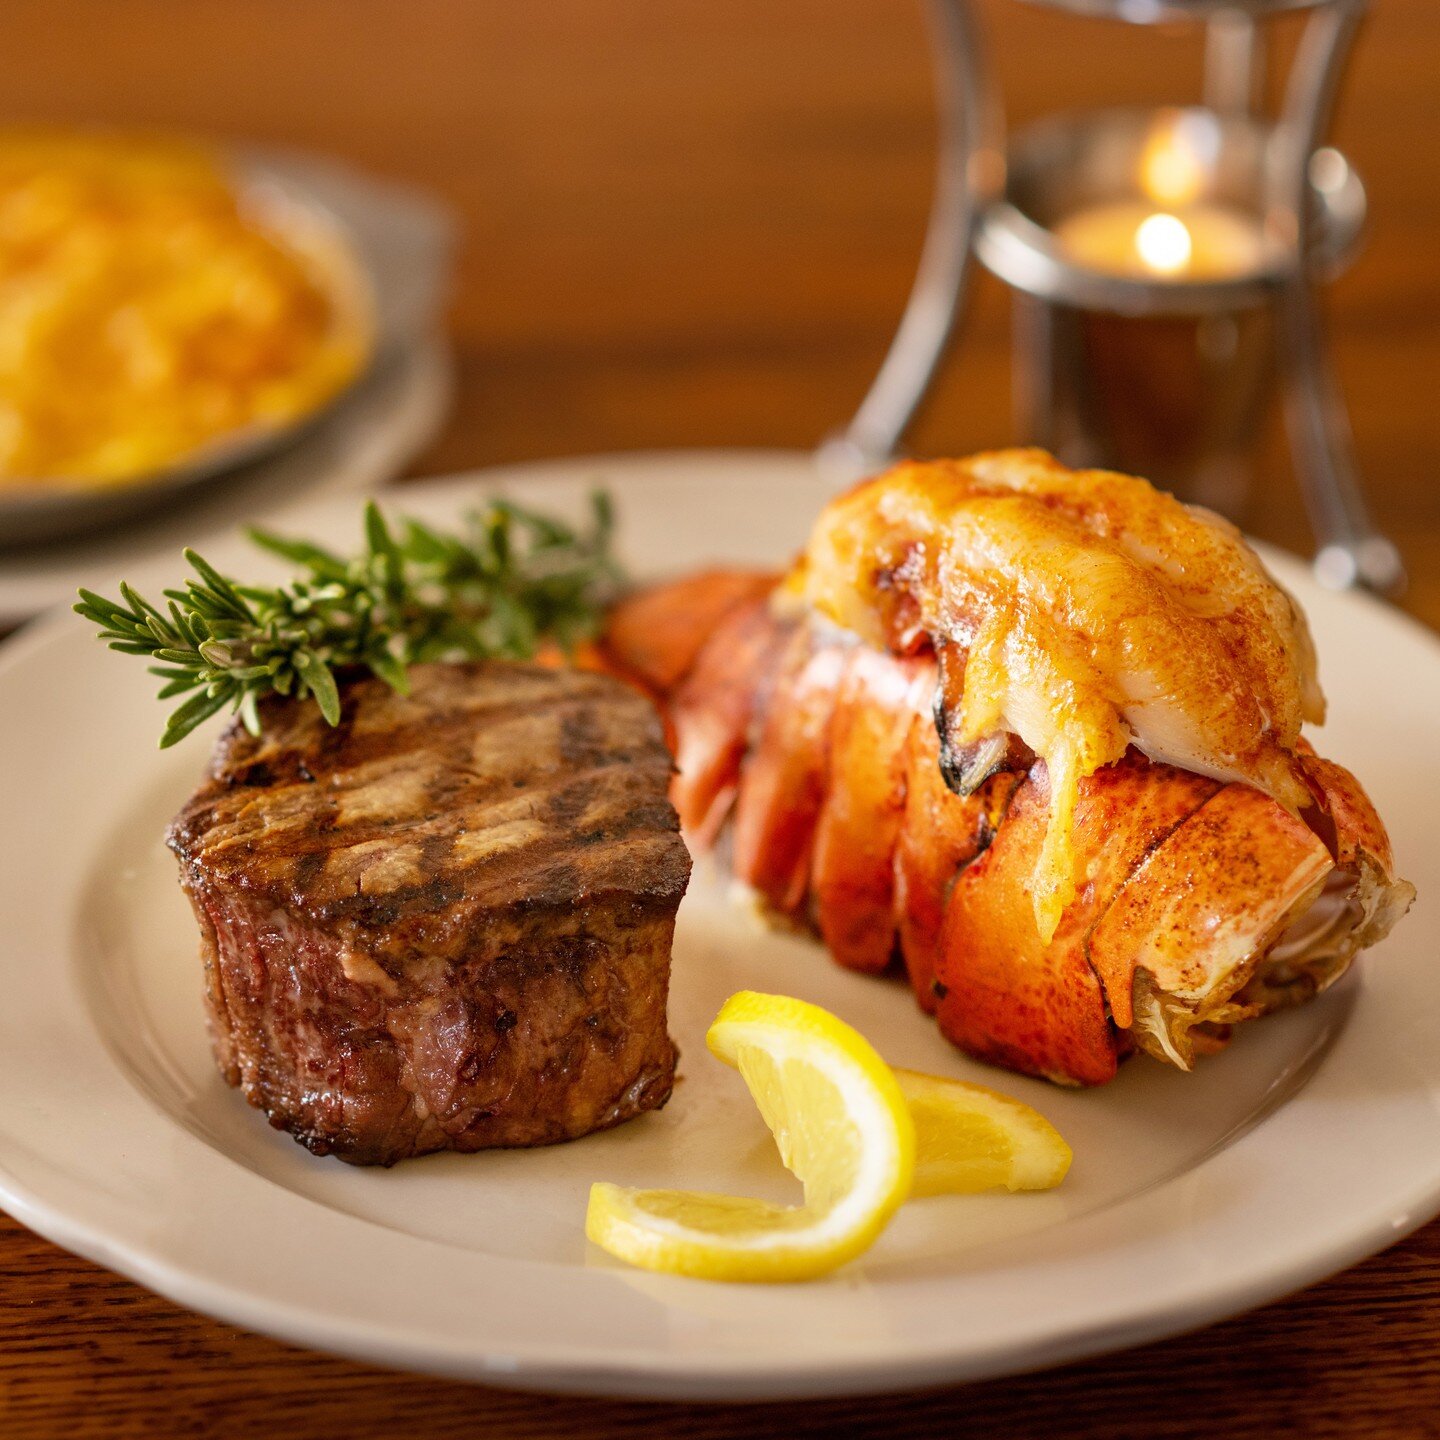 There is still time to celebrate at the Hubbell House with your Valentine! We have Steak &amp; Lobster on special each night through Sunday!

7oz Filet Mignon paired with a 6oz cold water lobster tail. Served with choice of salad, soup, herring, or c